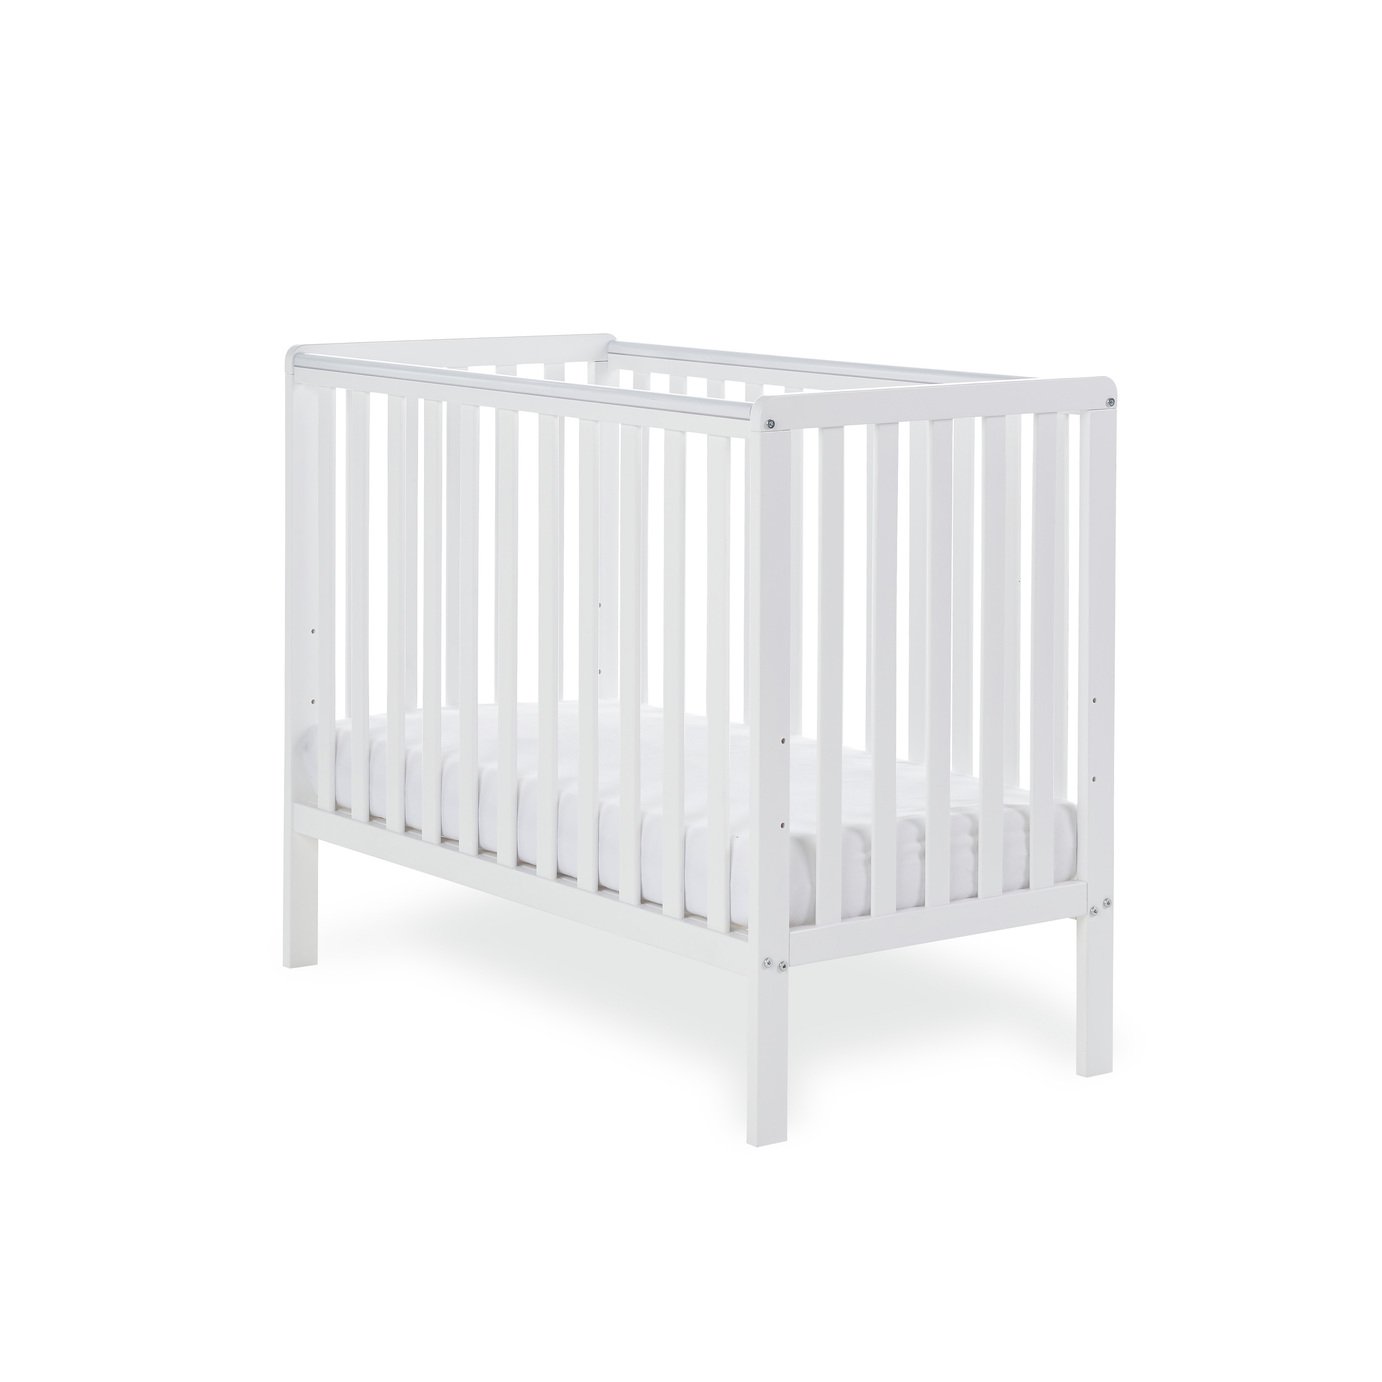 Obaby Bantam Space Saver Baby Cot with Mattress Review